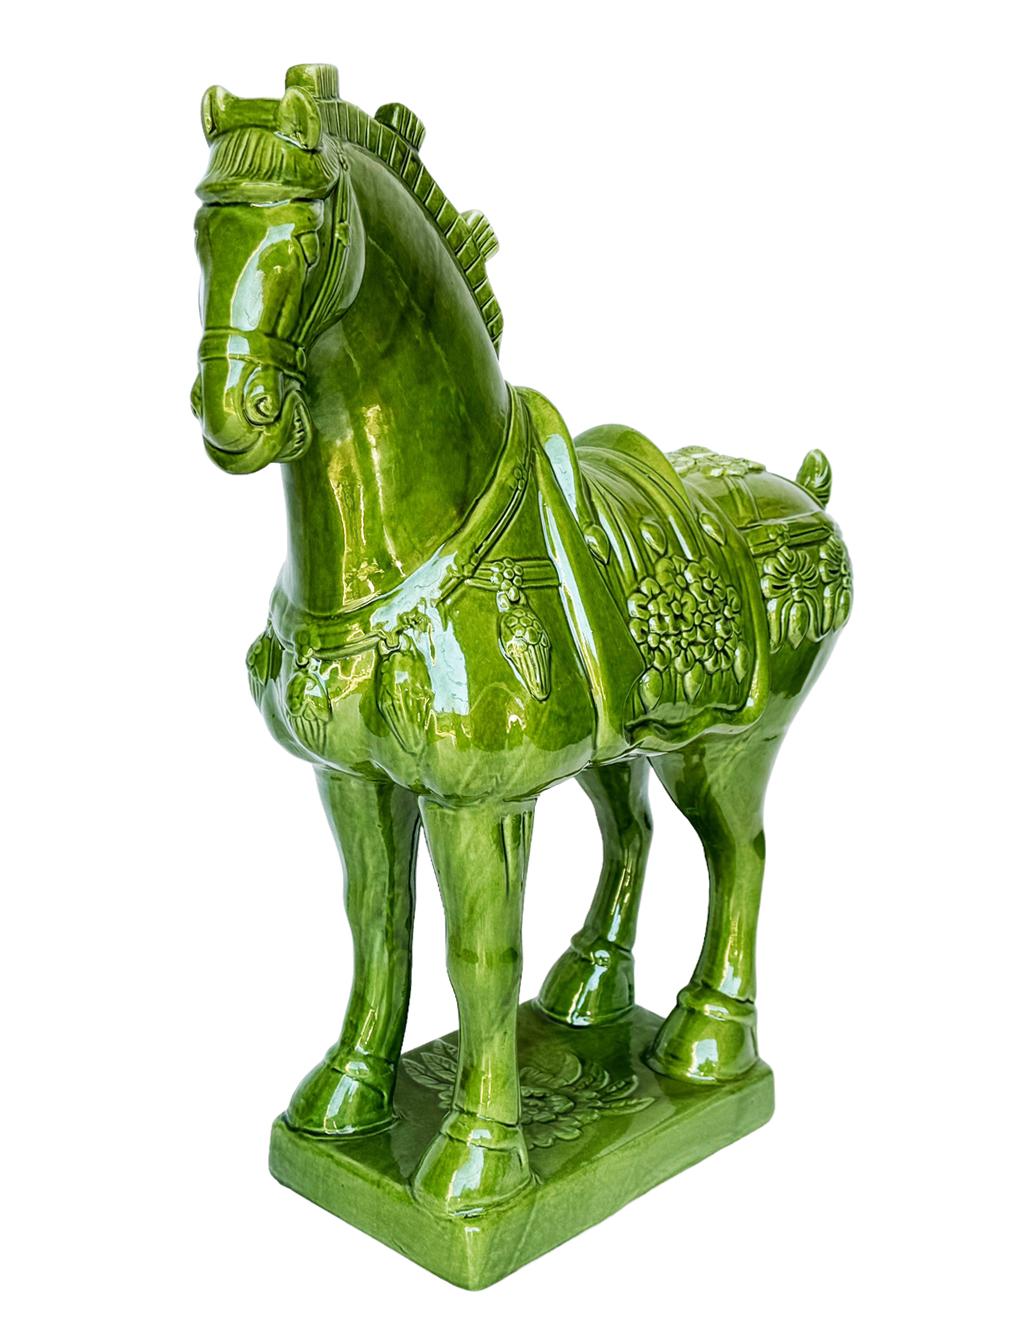 Mid-Century Modern Large Mid-Century Italian Modern Green Ceramic Horse Pottery Sculpture or Statue For Sale